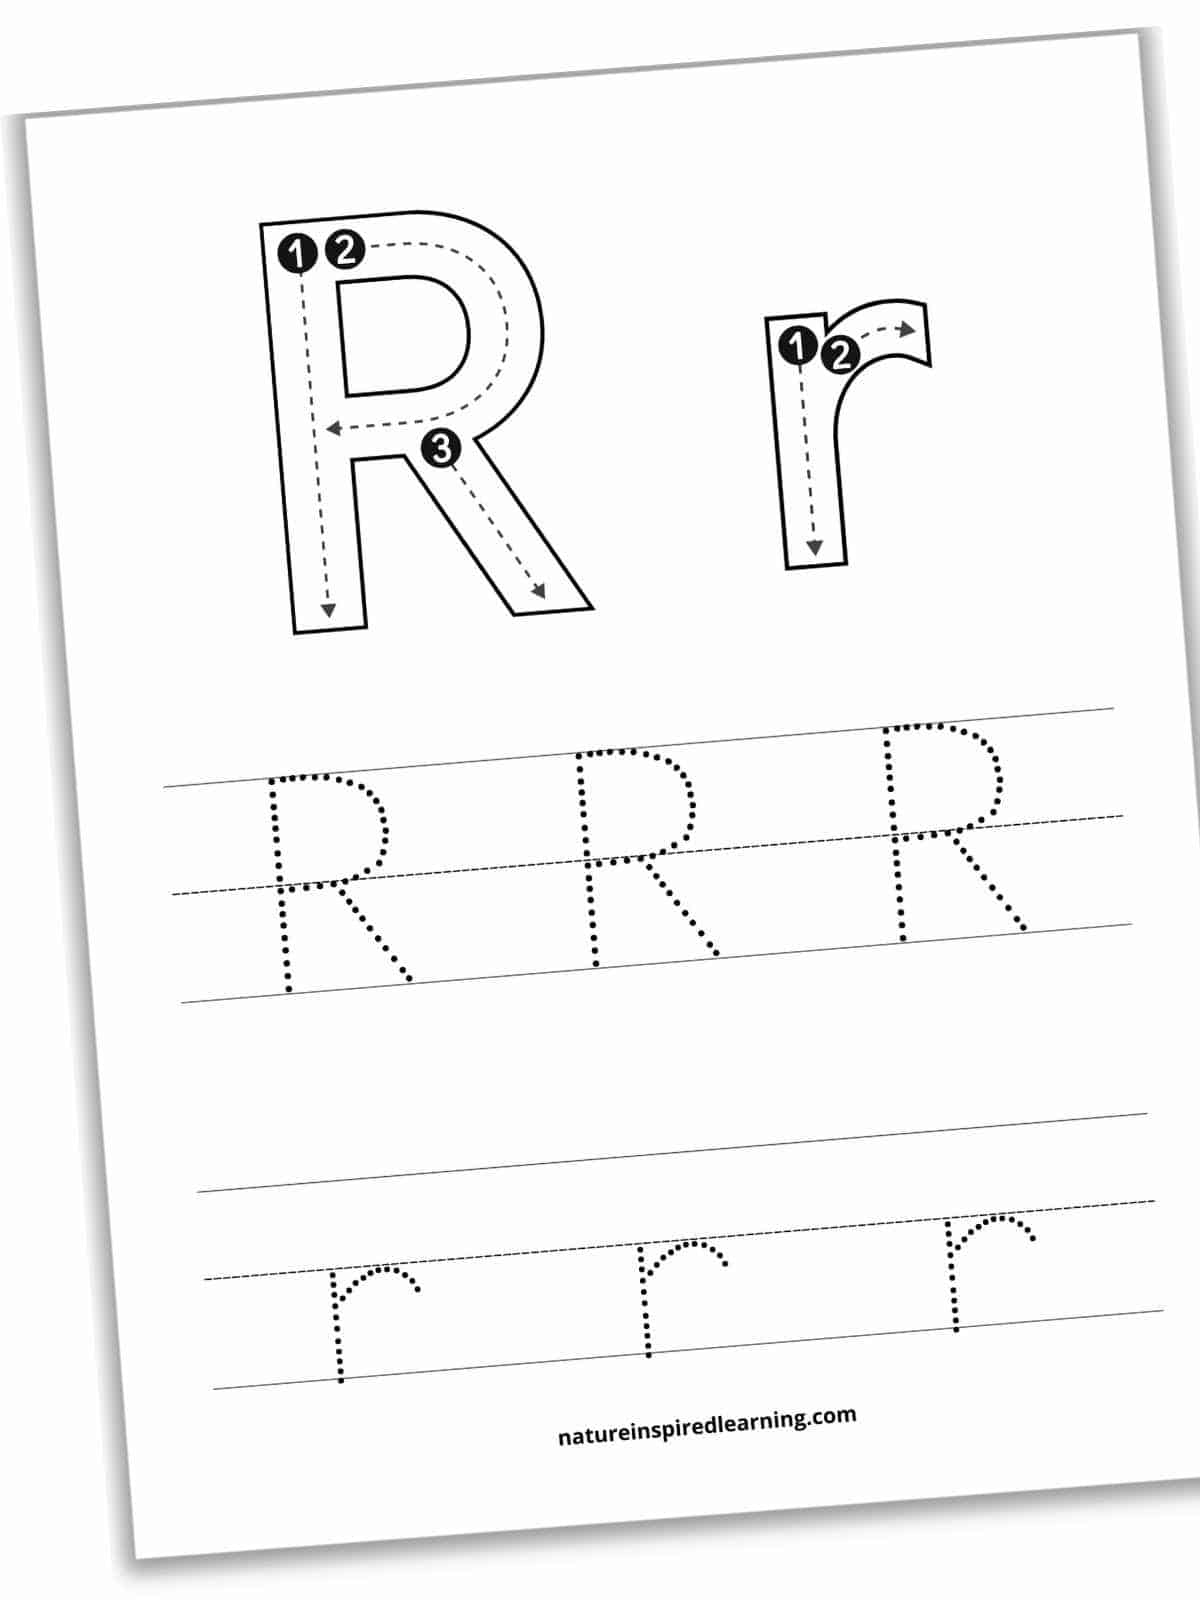 Worksheet with large R and r with dashed lines, arrows, and numbers inside above two sets of lines with traceable letters